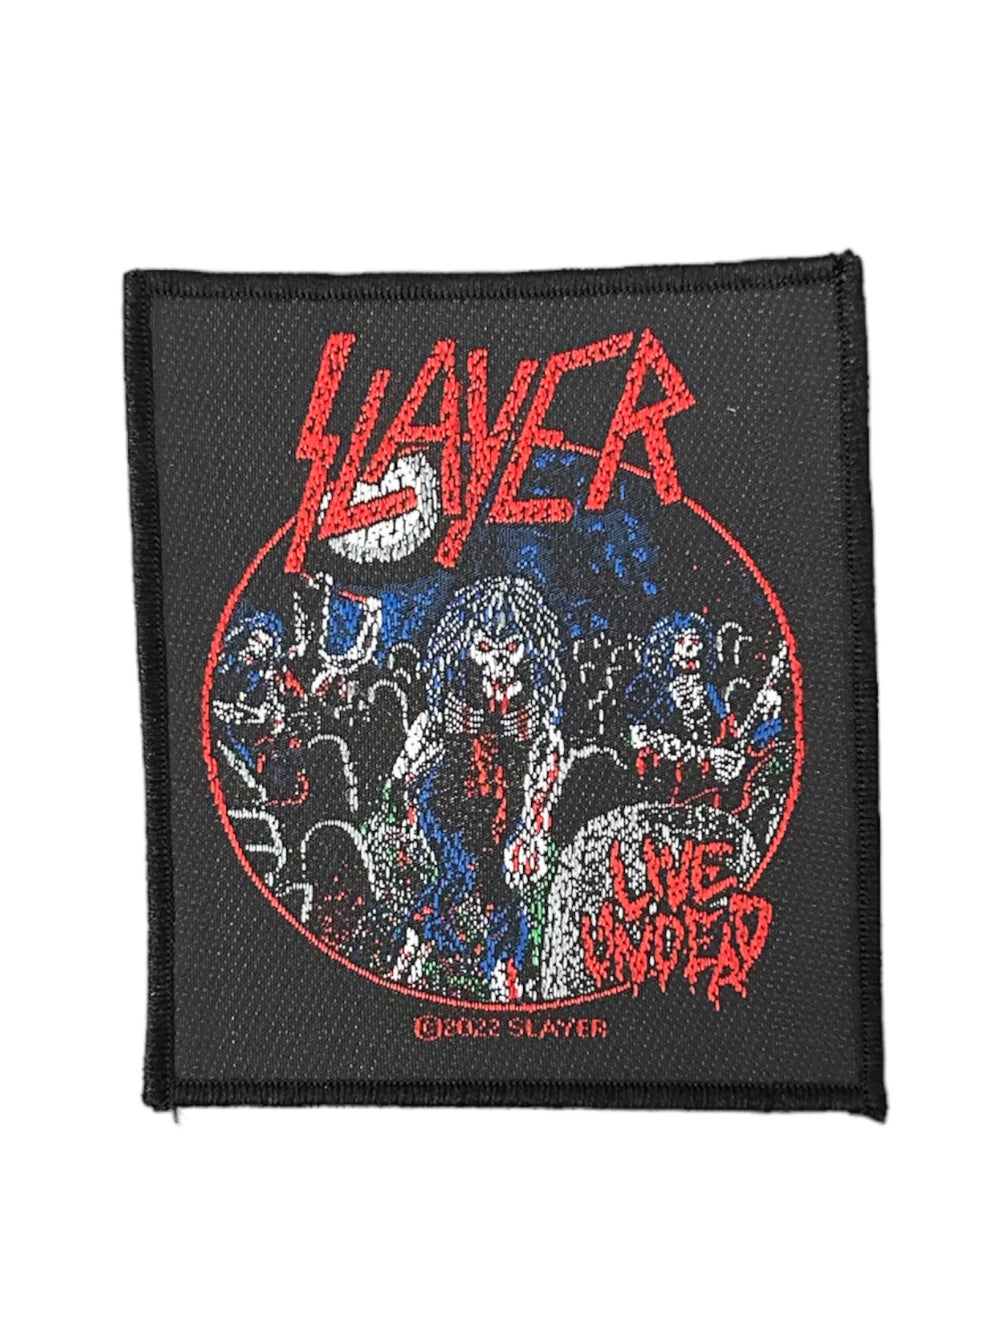 Slayer Undead : Official Woven Patch Brand New